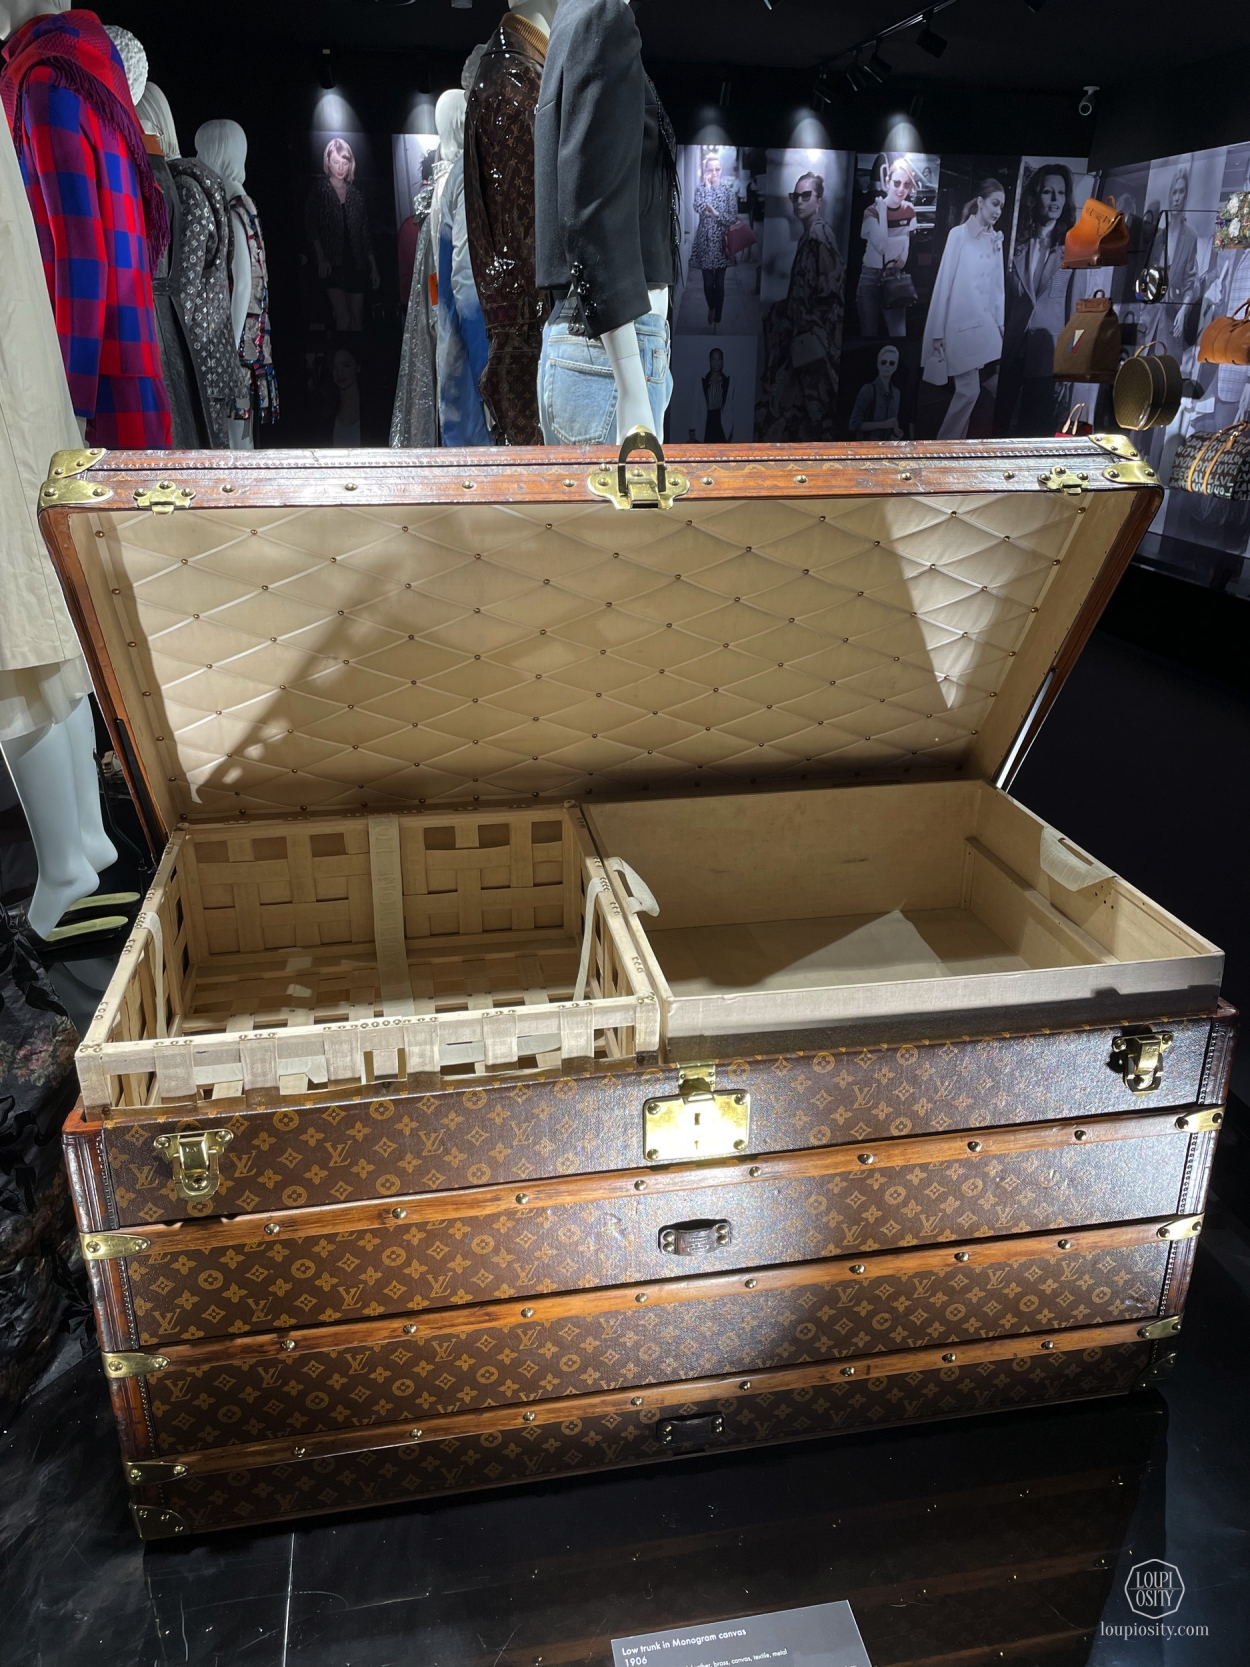 Louis Vuitton Brings Its Iconic SEE LV to Dubai - UAE Moments